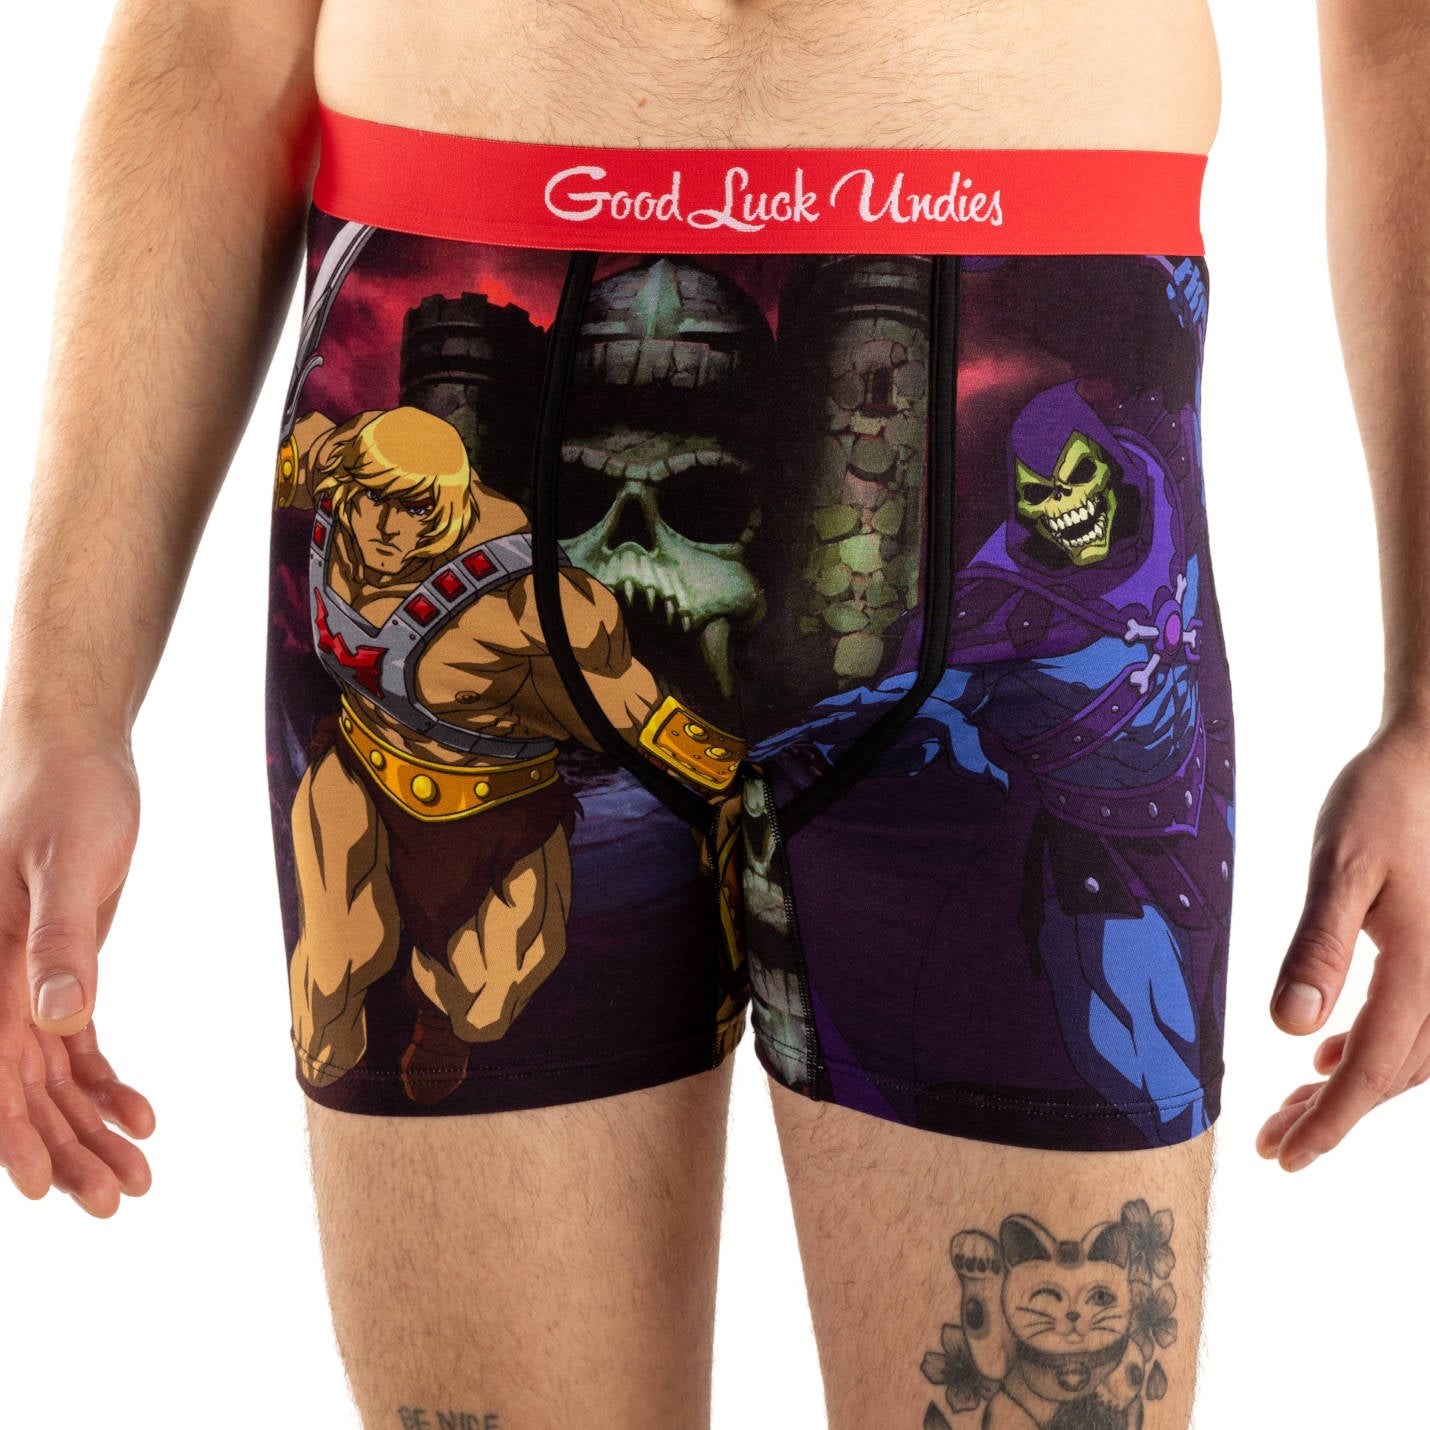 Molke - Feel the POWER of our super undies! If you're looking for